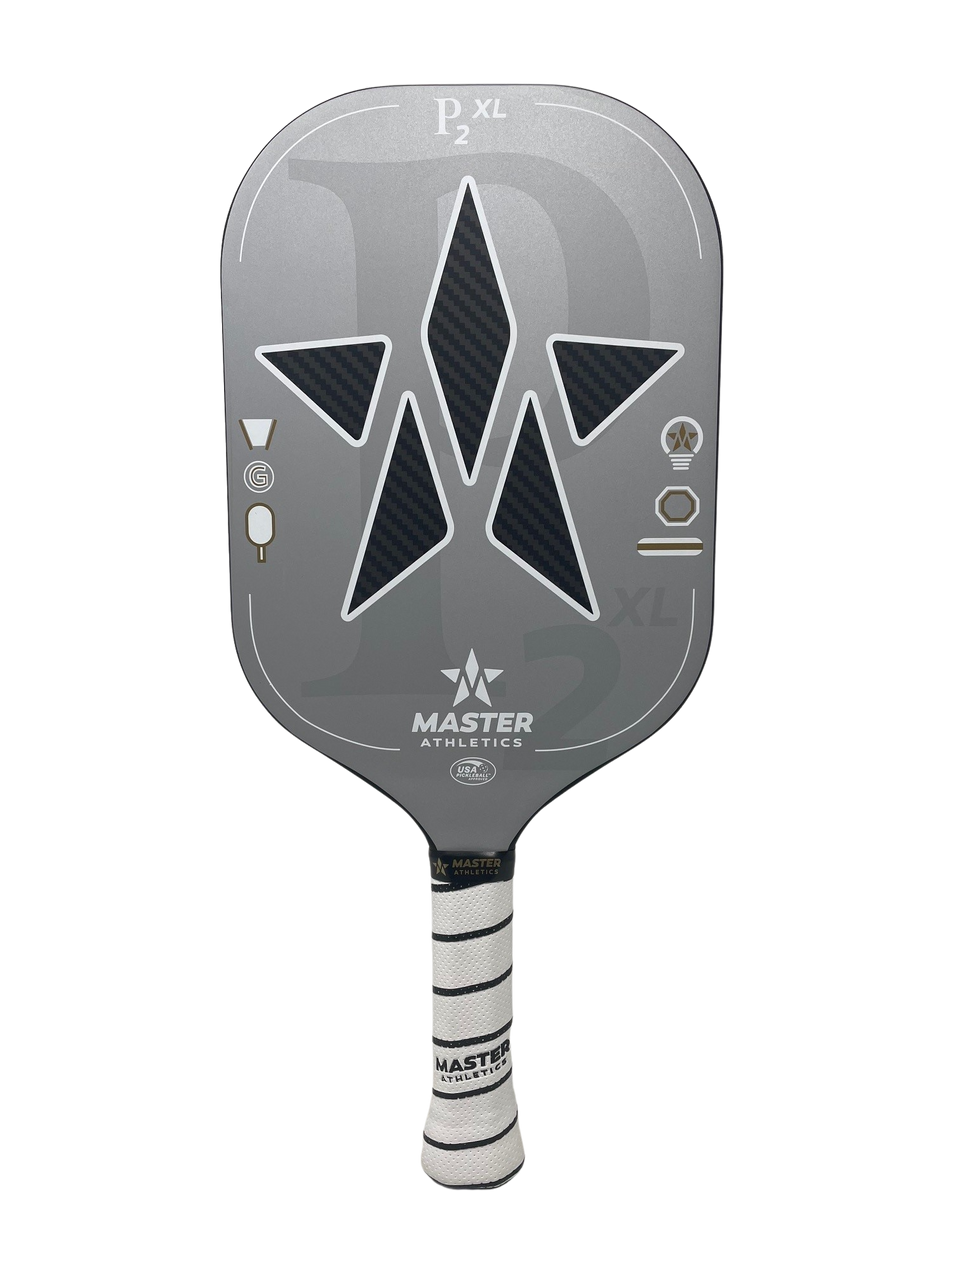 A Master Athletics P2XL Pickleball Paddle with a star on it.